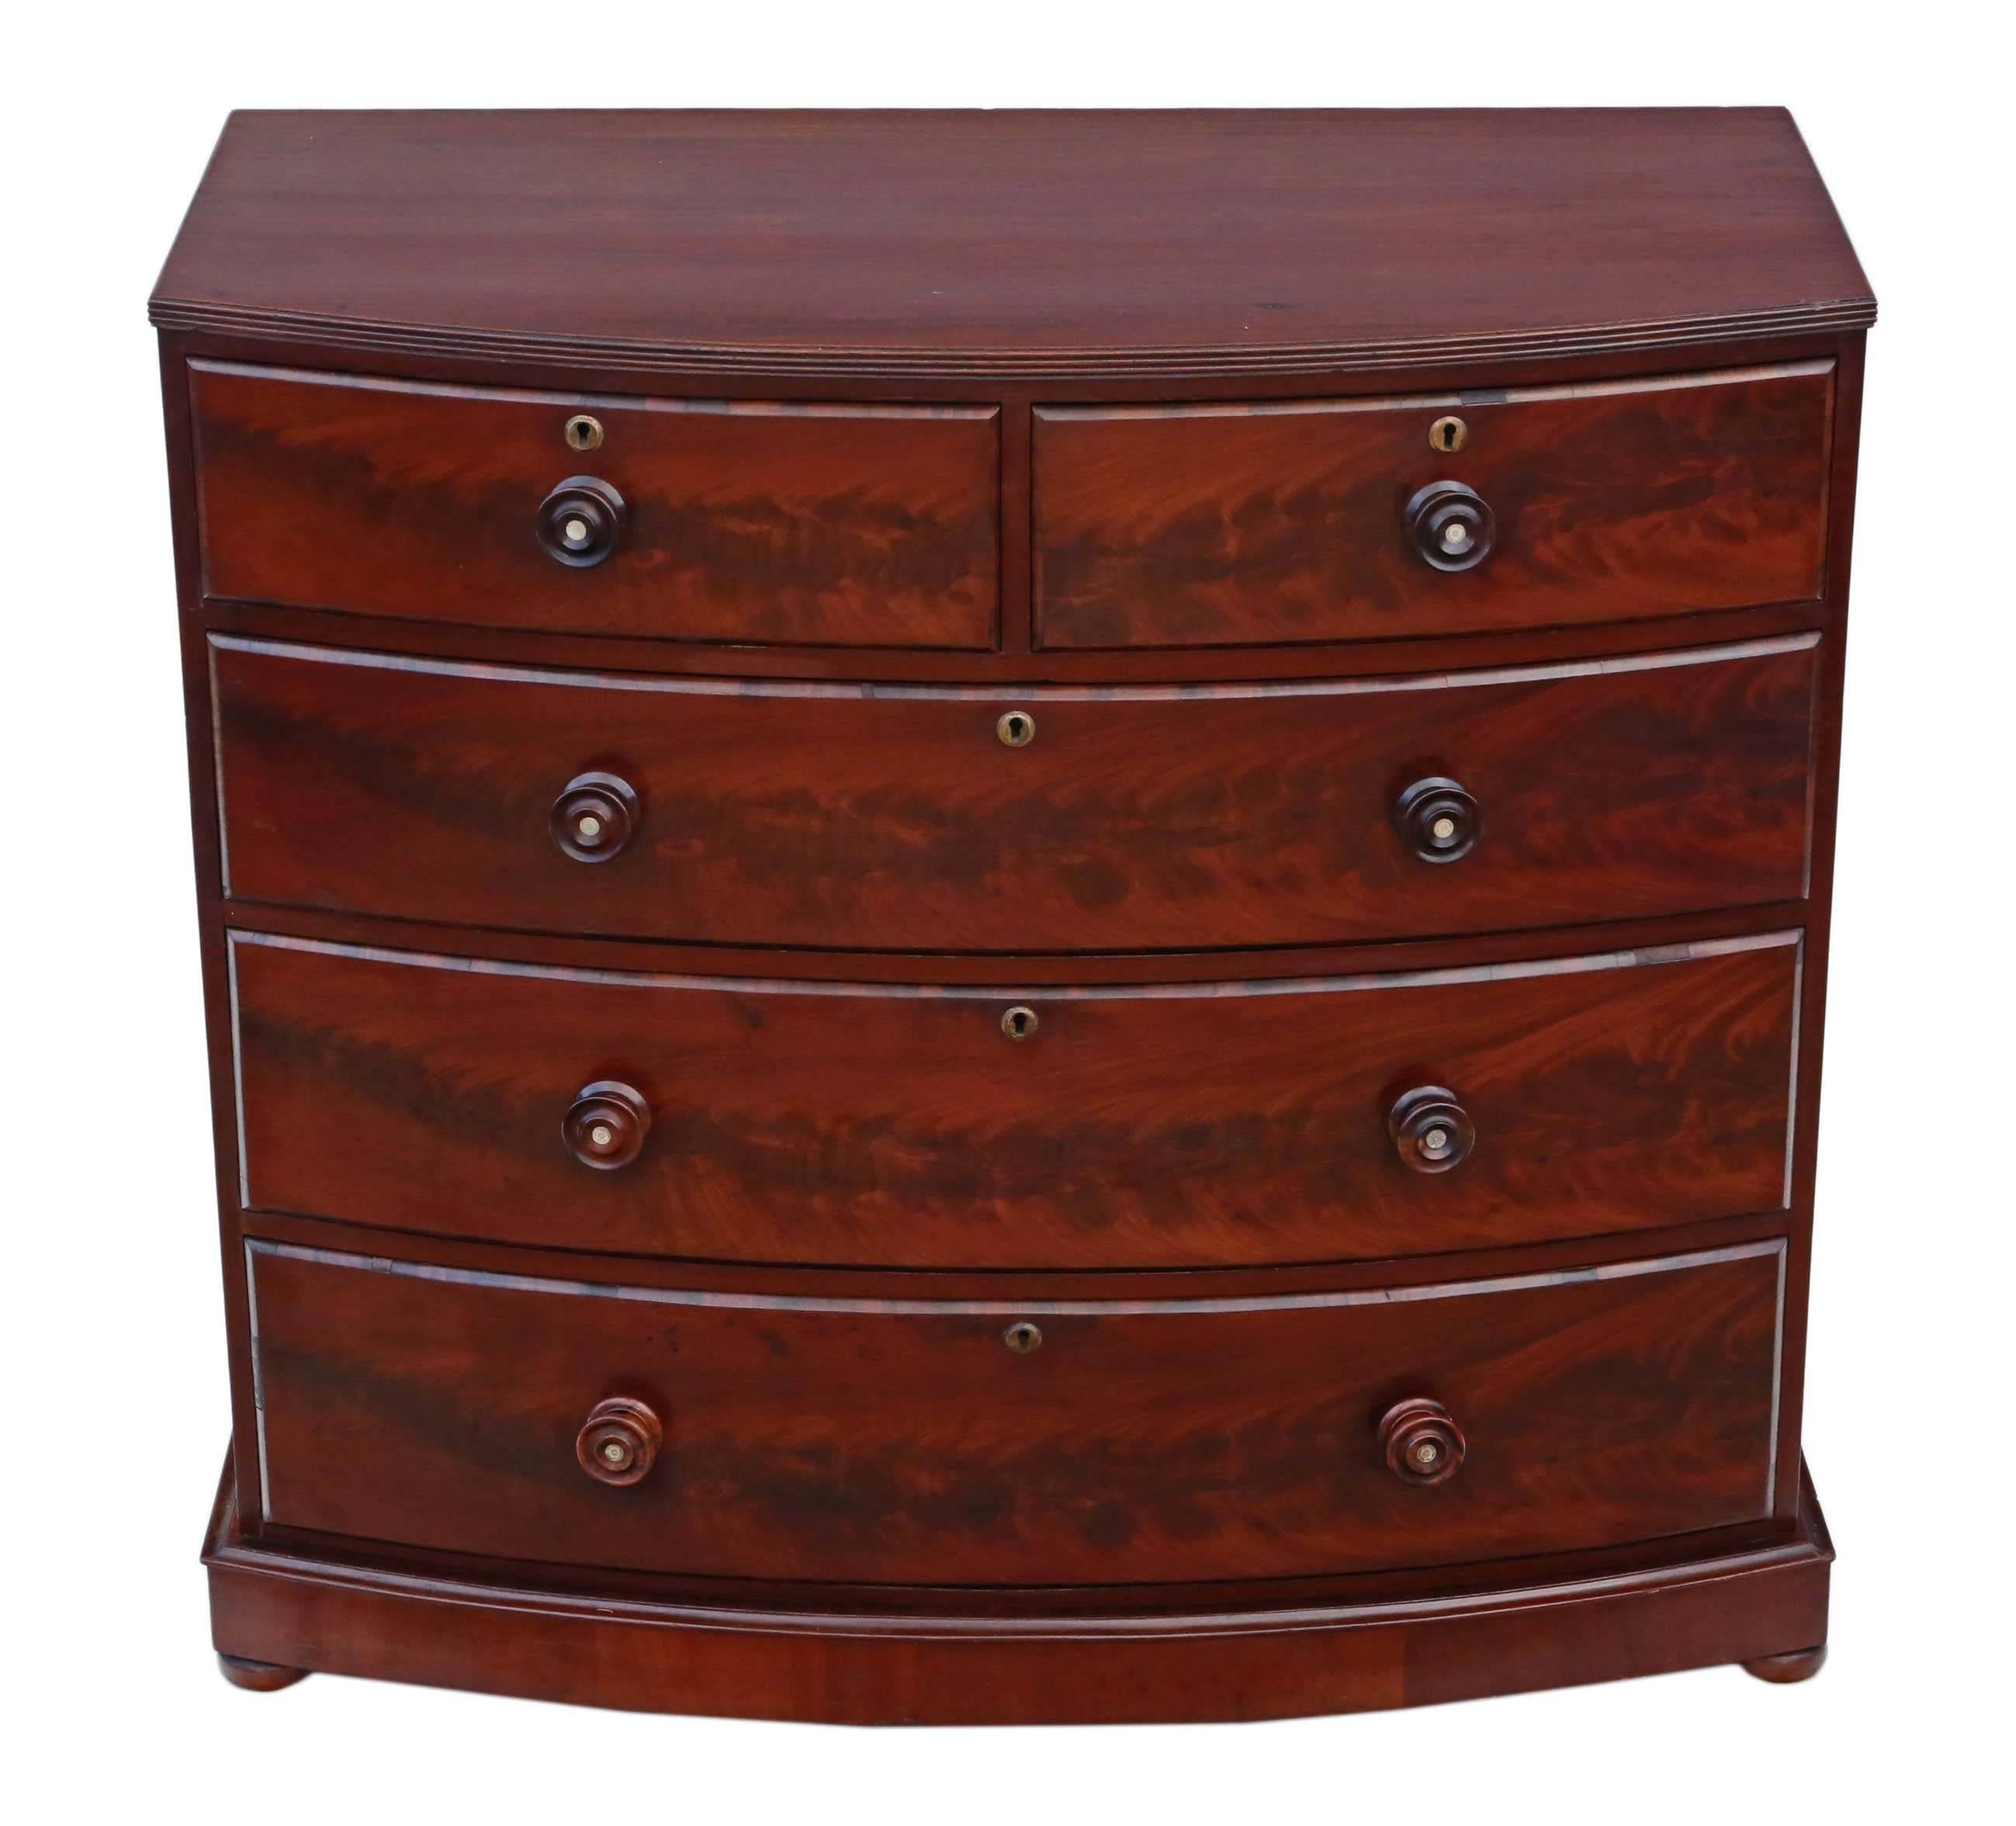 Antique large Victorian flame mahogany bow front chest of drawers.

No loose joints and the oak lined drawers slide freely. A nice quality piece, with clean, simple styling.

No woodworm.

Overall maximum dimensions: 118cm W x 56cm D x 105cm